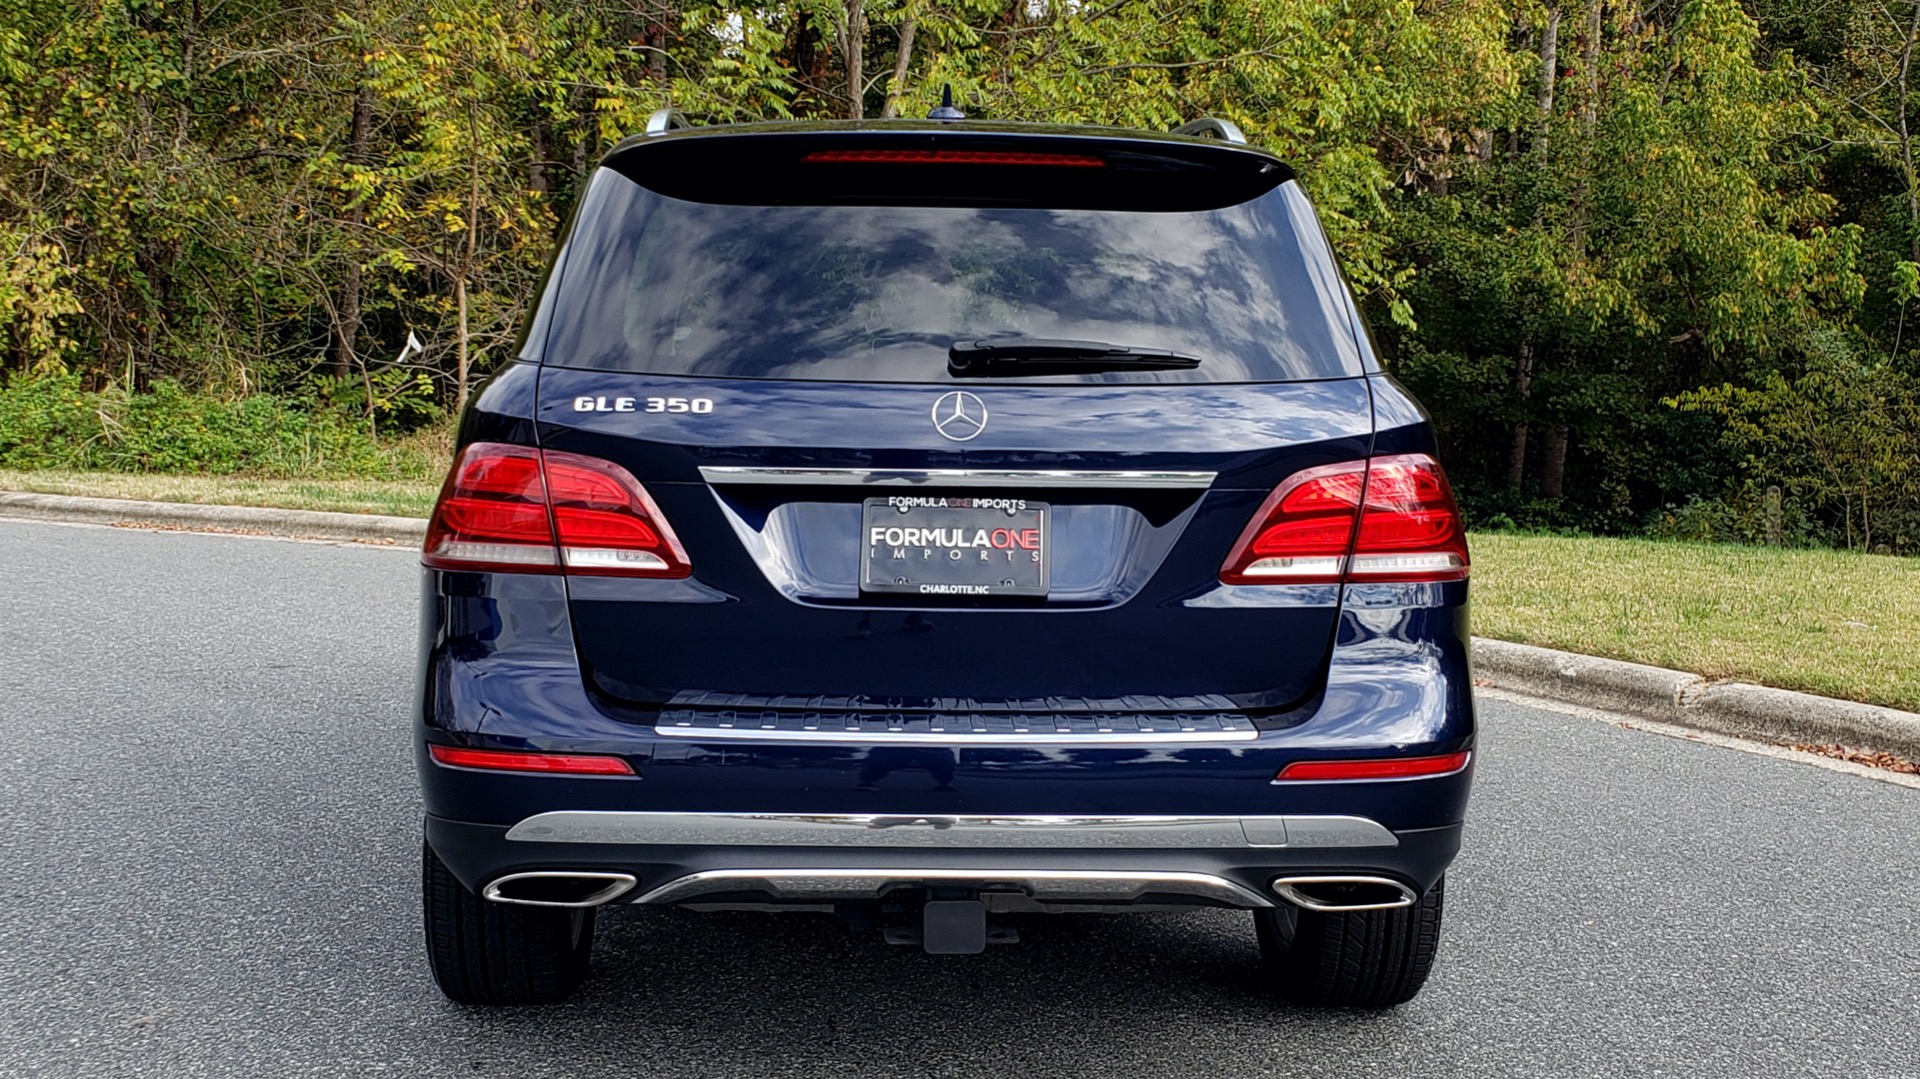 Used 2016 Mercedes-Benz GLE 350 PREMIUM / NAV / SUNROOF / BACK-UP CAMERA / LANE TRACKING for sale Sold at Formula Imports in Charlotte NC 28227 35